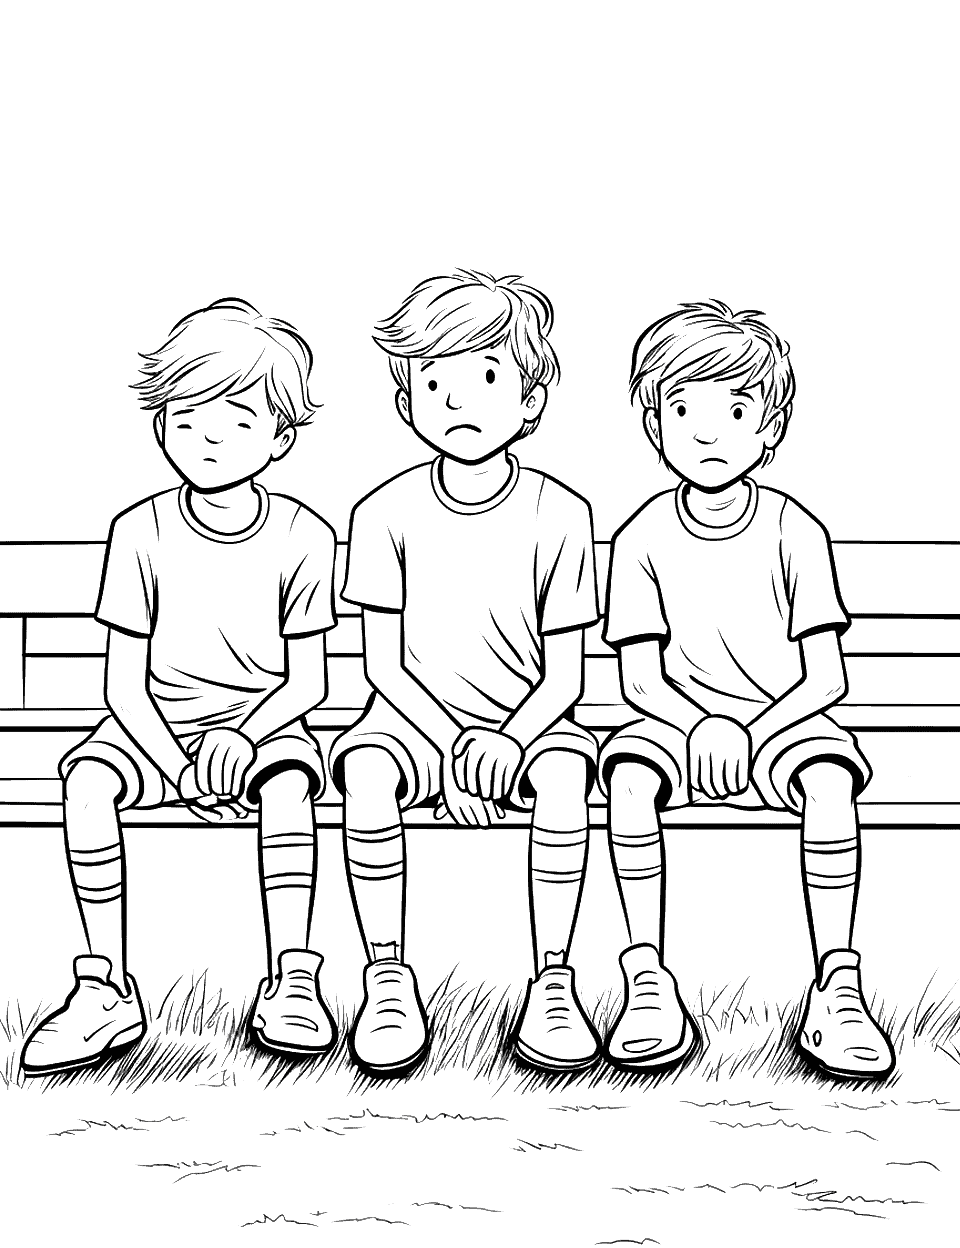 Tough Loss Baseball Coloring Page - Players sitting dejectedly on the bench after a devastating losing game.